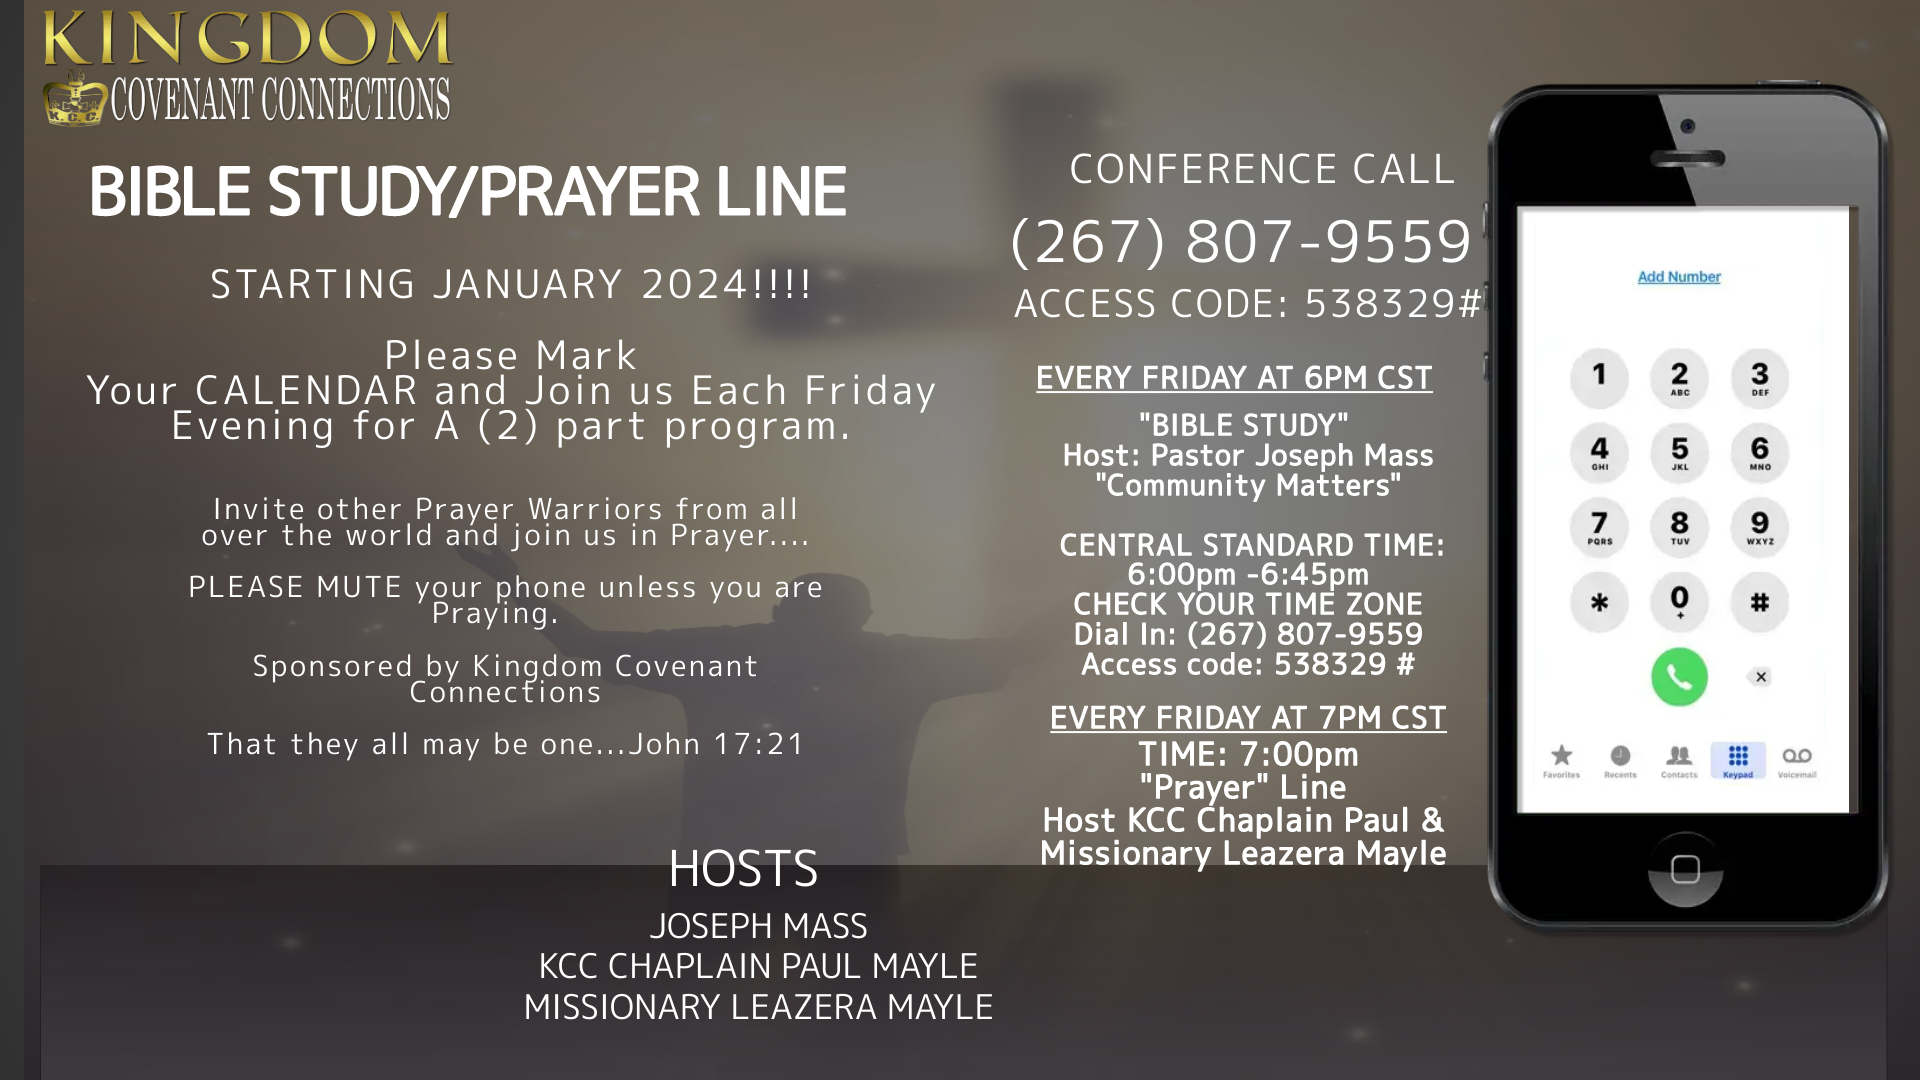 Please Mark Your CALENDAR and Join us Each Friday Evening for A (2) part program. PART (1) "BIBLE STUDY" Host: Pastor Joseph Mass "Community Matters" CENTRAL STANDARD TIME: 6:00pm -6:45pm CHECK YOUR TIME ZONE Dial In: (267) 807-9559 Access code: 538329 # PART (2) CENTRAL STANDARD TIME: 7:00pm "Prayer" Host KCC Chaplain Paul & Missionary Leazera Mayle PLEASE CHECK YOUR TIME ZONE Dial In: (267) 807-9559 Access code: 538329 # PLEASE MUTE your phone unless you are Praying, Speaking etc. Sponsored by Kingdom Covenant Connections ....that they all may be one...John 1721